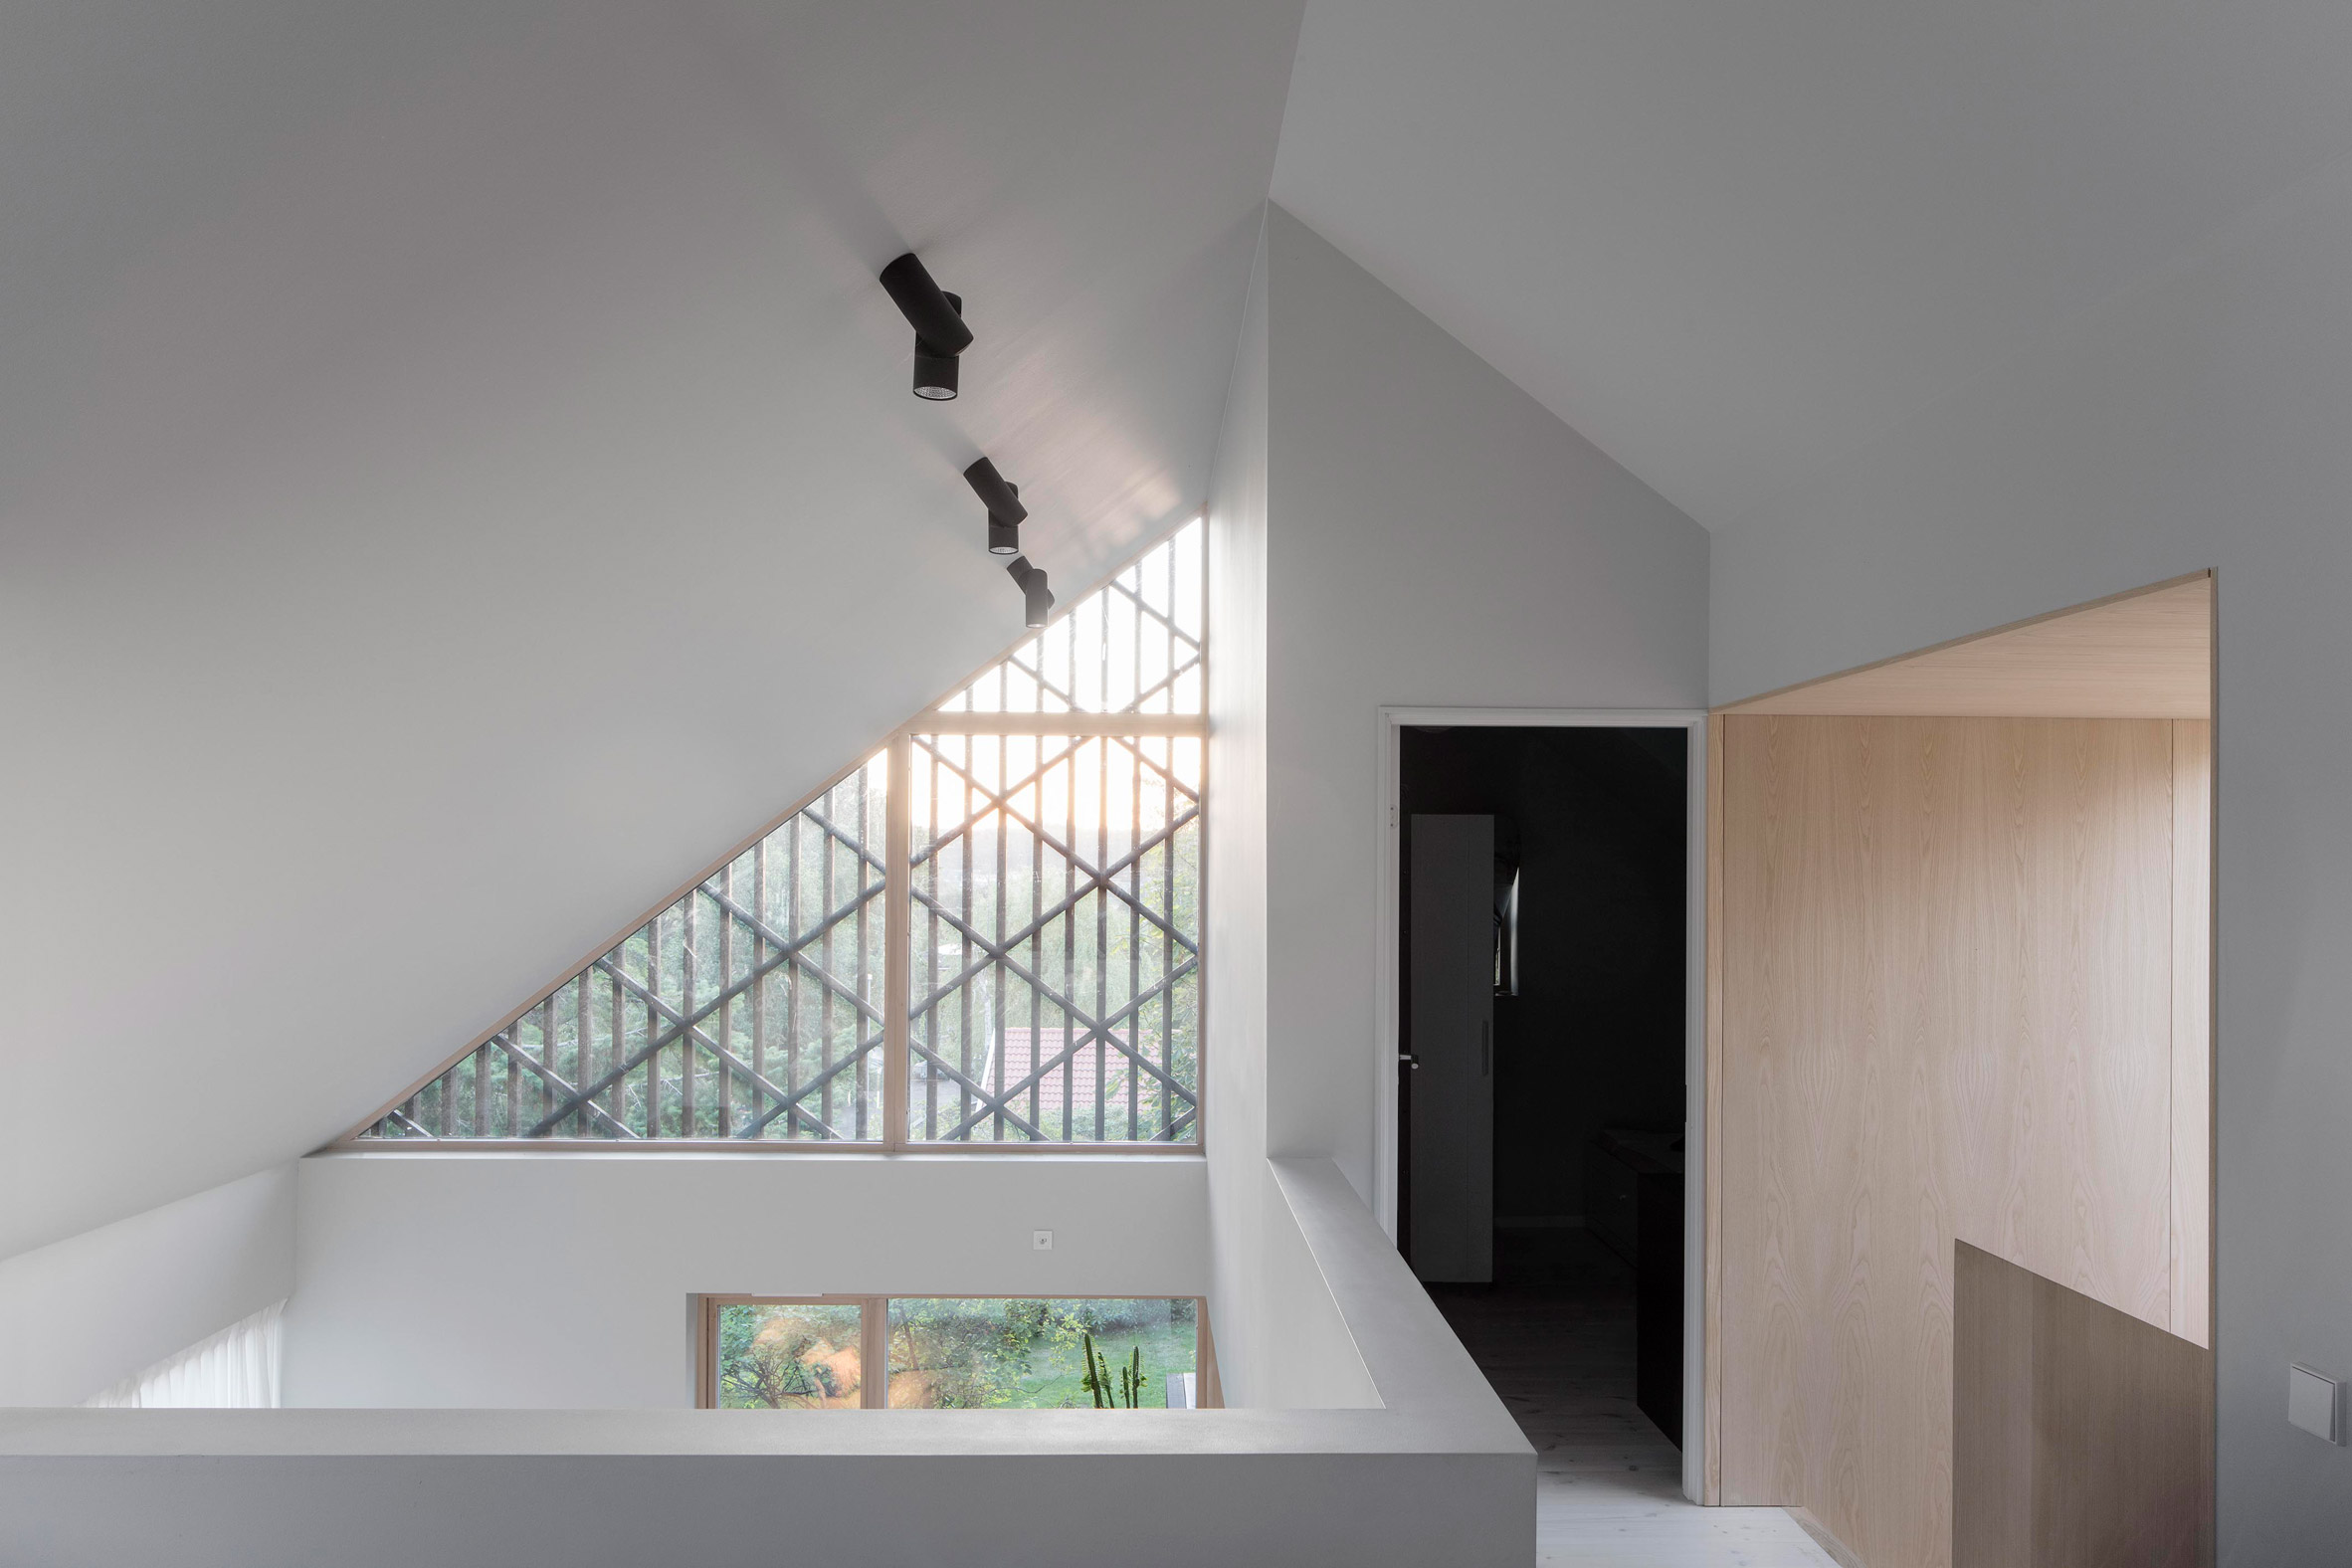 Stairwell in Villa Timmerman by Andreas Lyckefors and Josefine Wikholm